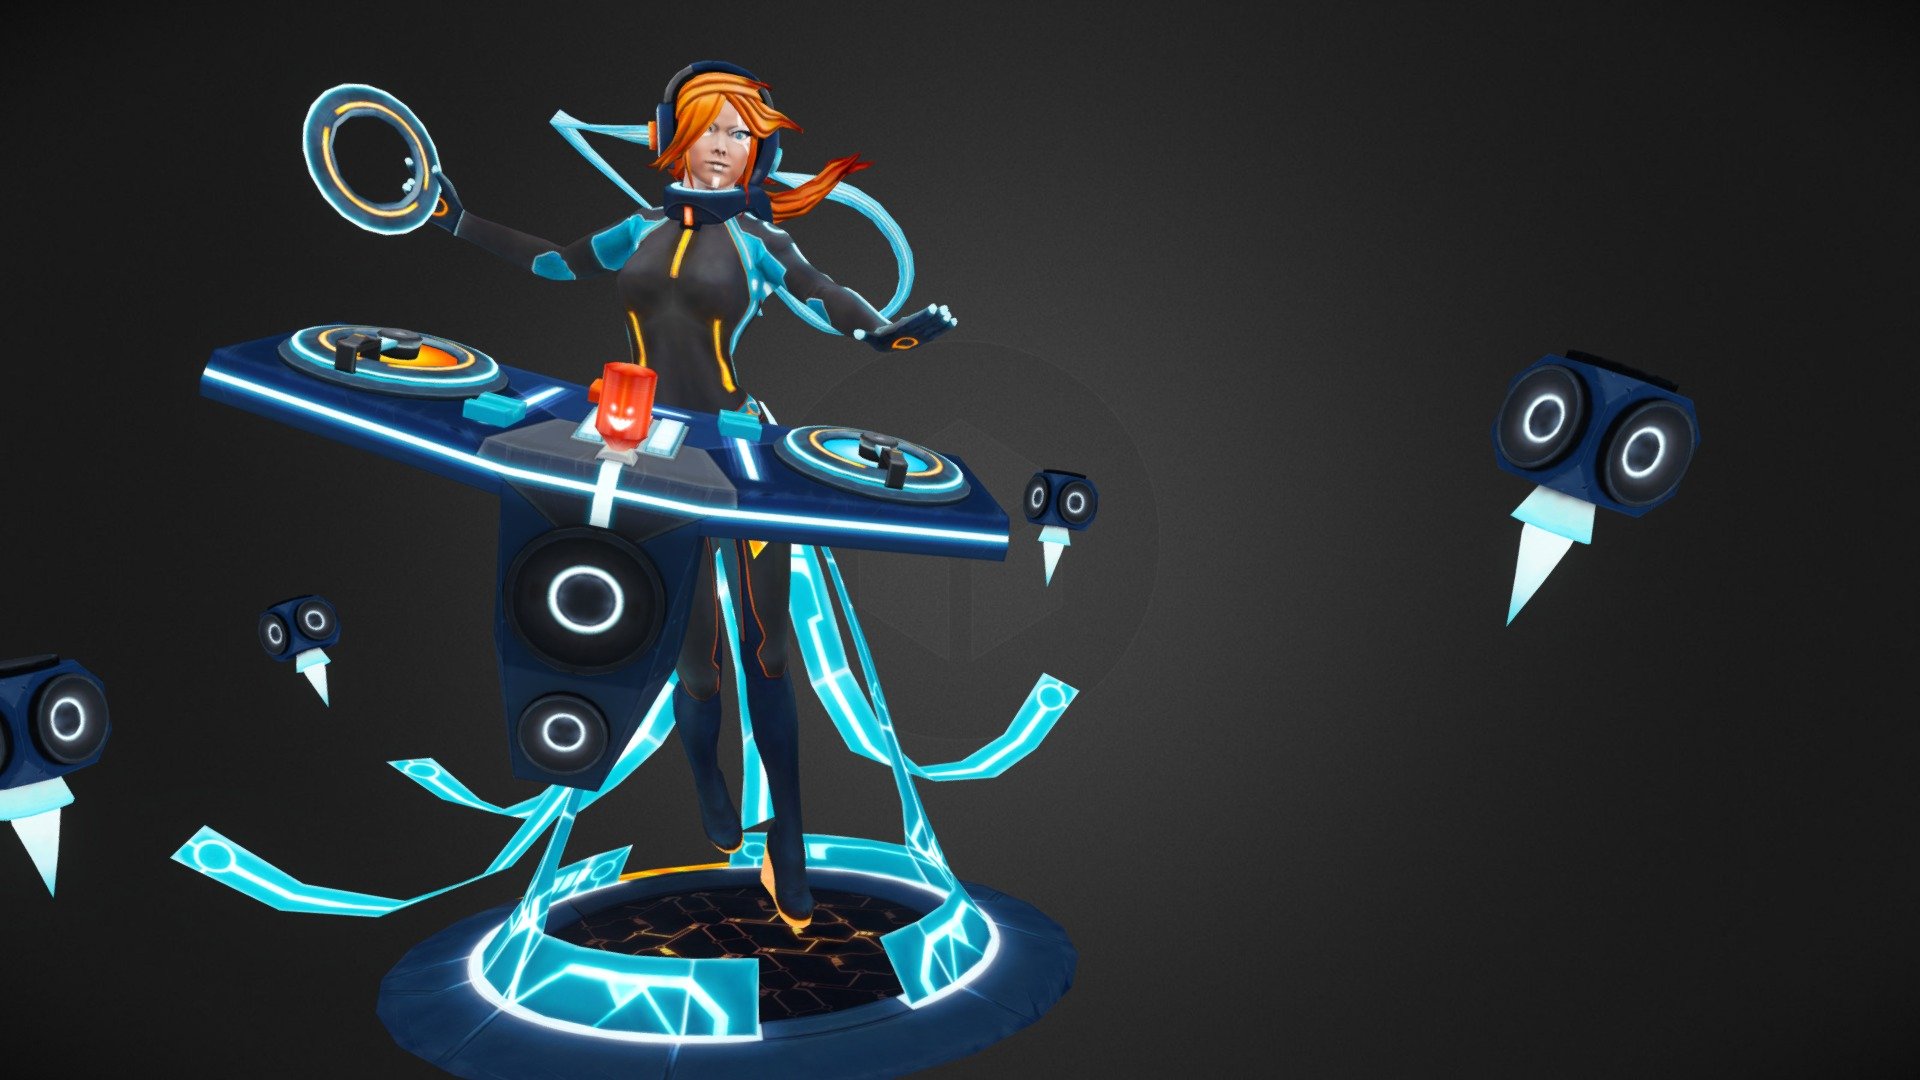 Polycount - Riot Art Contest 2014 - Character Entry
Wip Thread (http://www.polycount.com/forum/showthread.php?p=2205780#post2205780) - DJ Sona - 3D model by pn 3d model